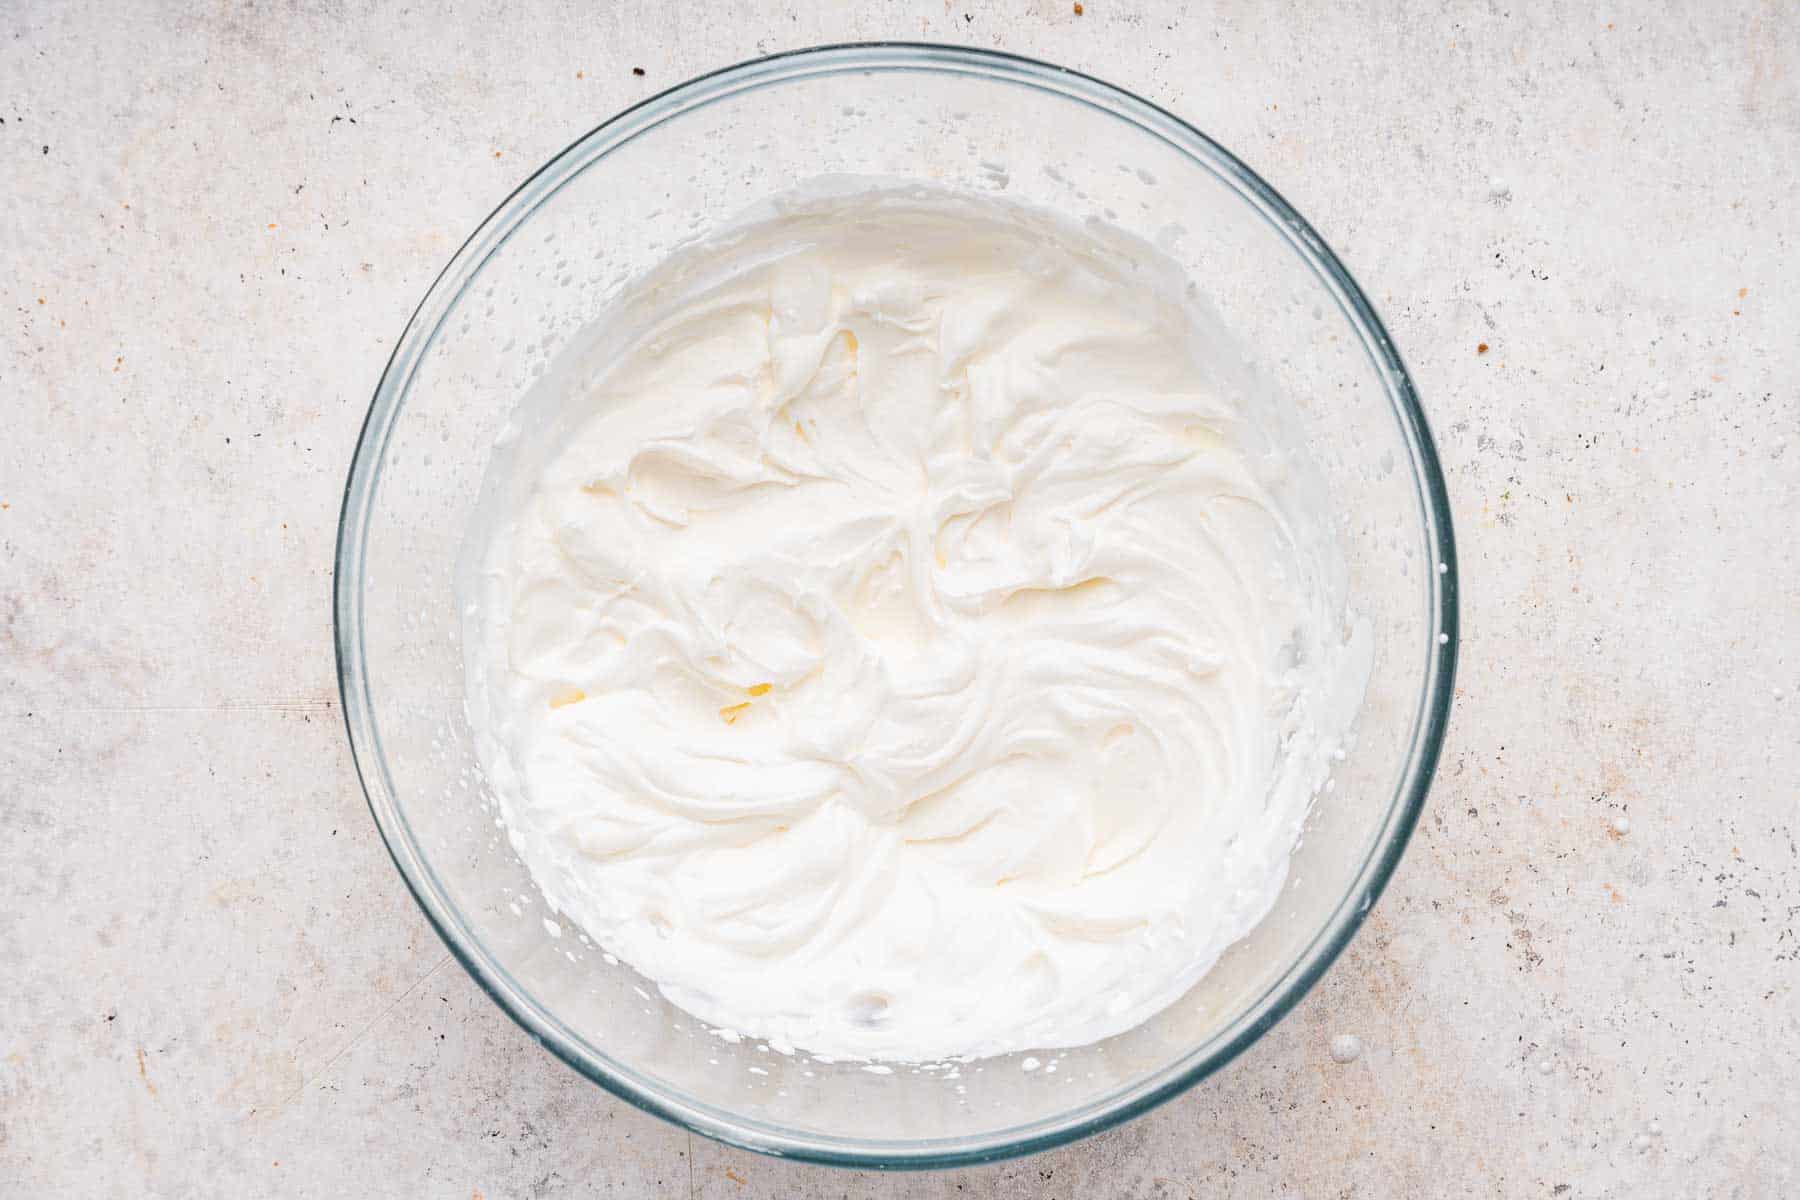 Bowl of freshly whipped cream on marble surface.